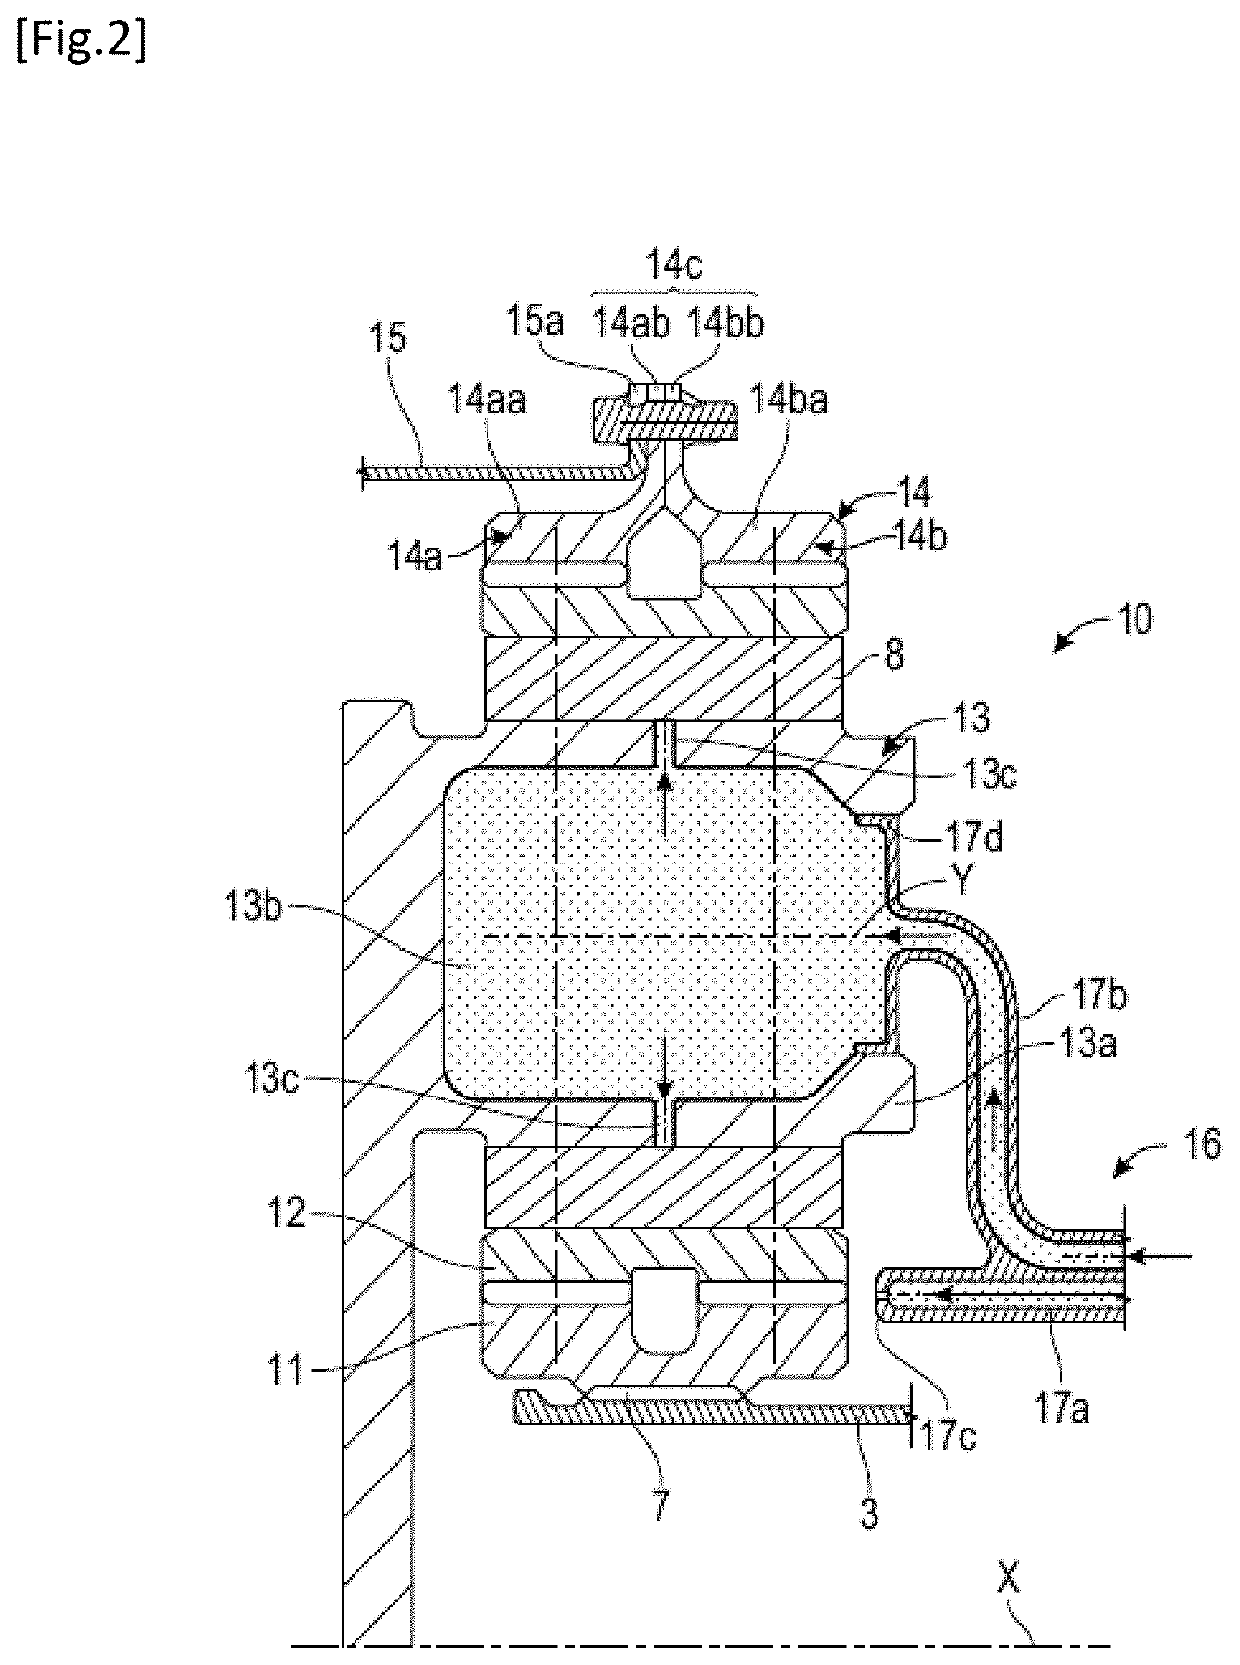 Planetary gearbox assembly for a turbine engine